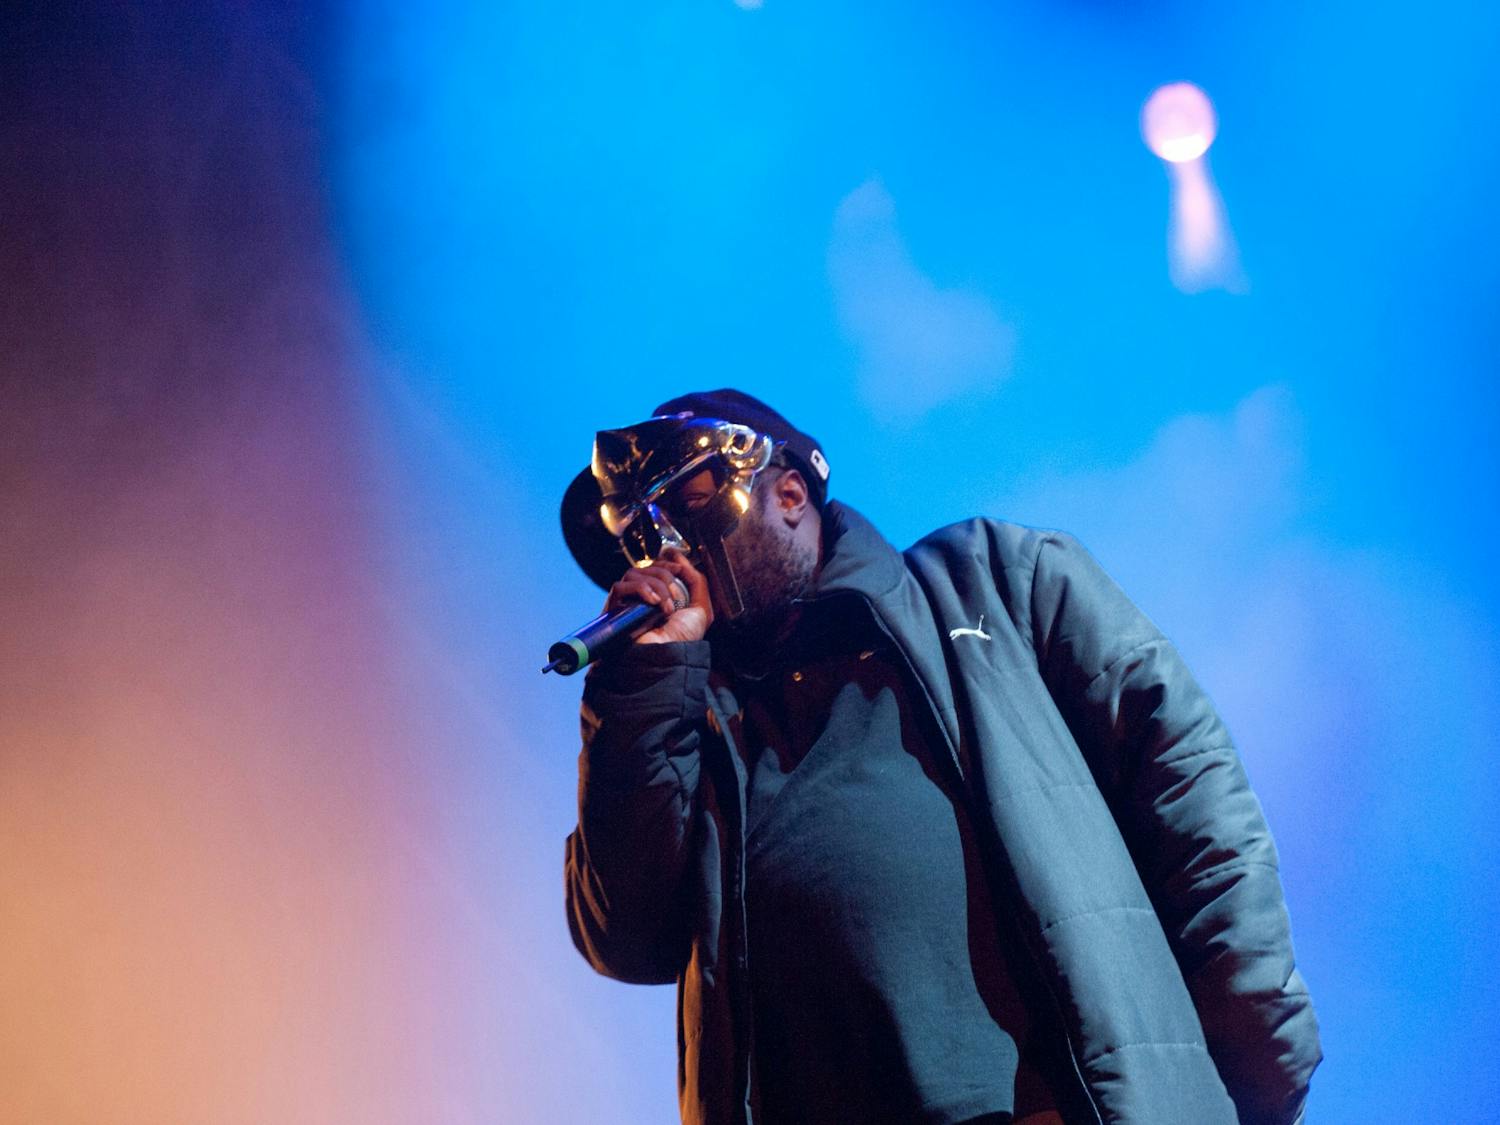 MF DOOM essentially created audio comics, and was able to bring listeners into his world.